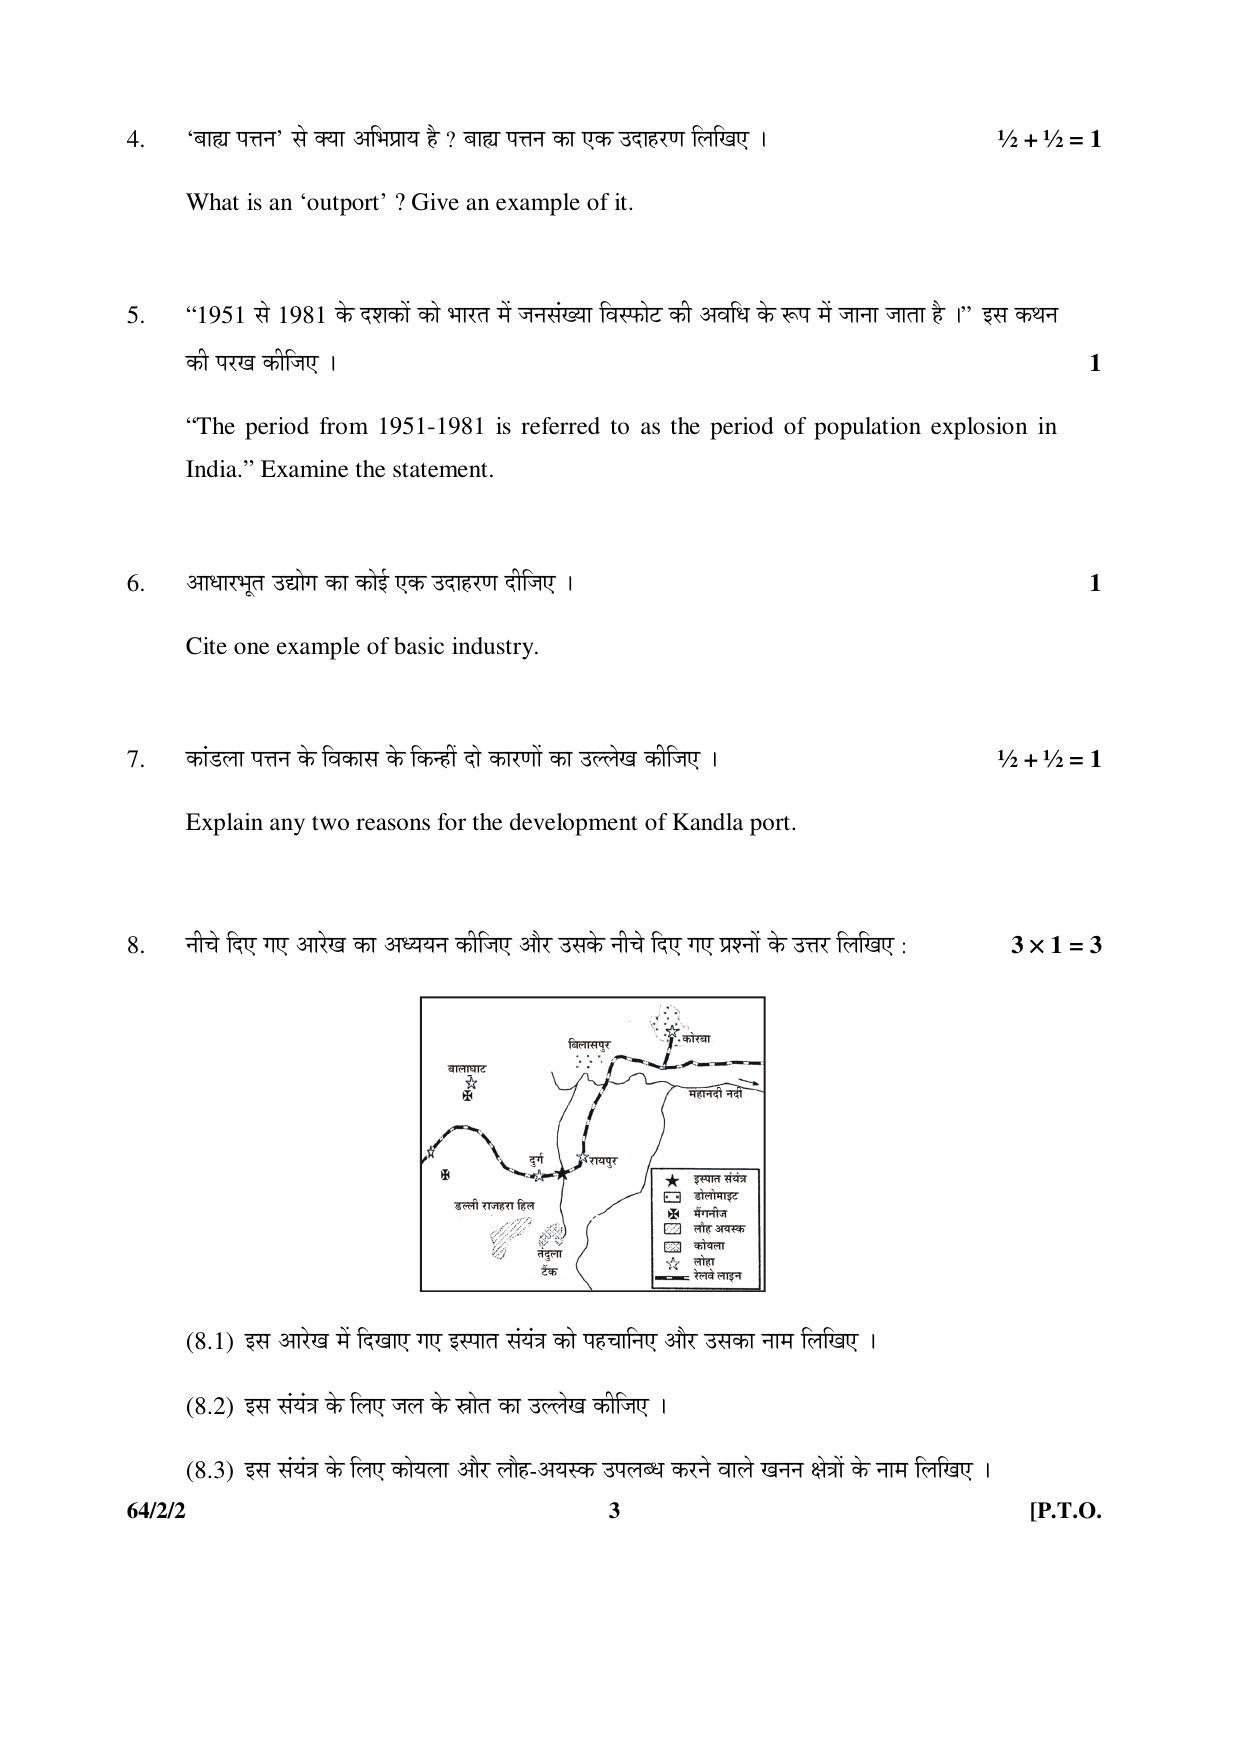 CBSE Class 12 64-2-2 Geography 2016 Question Paper - Page 3